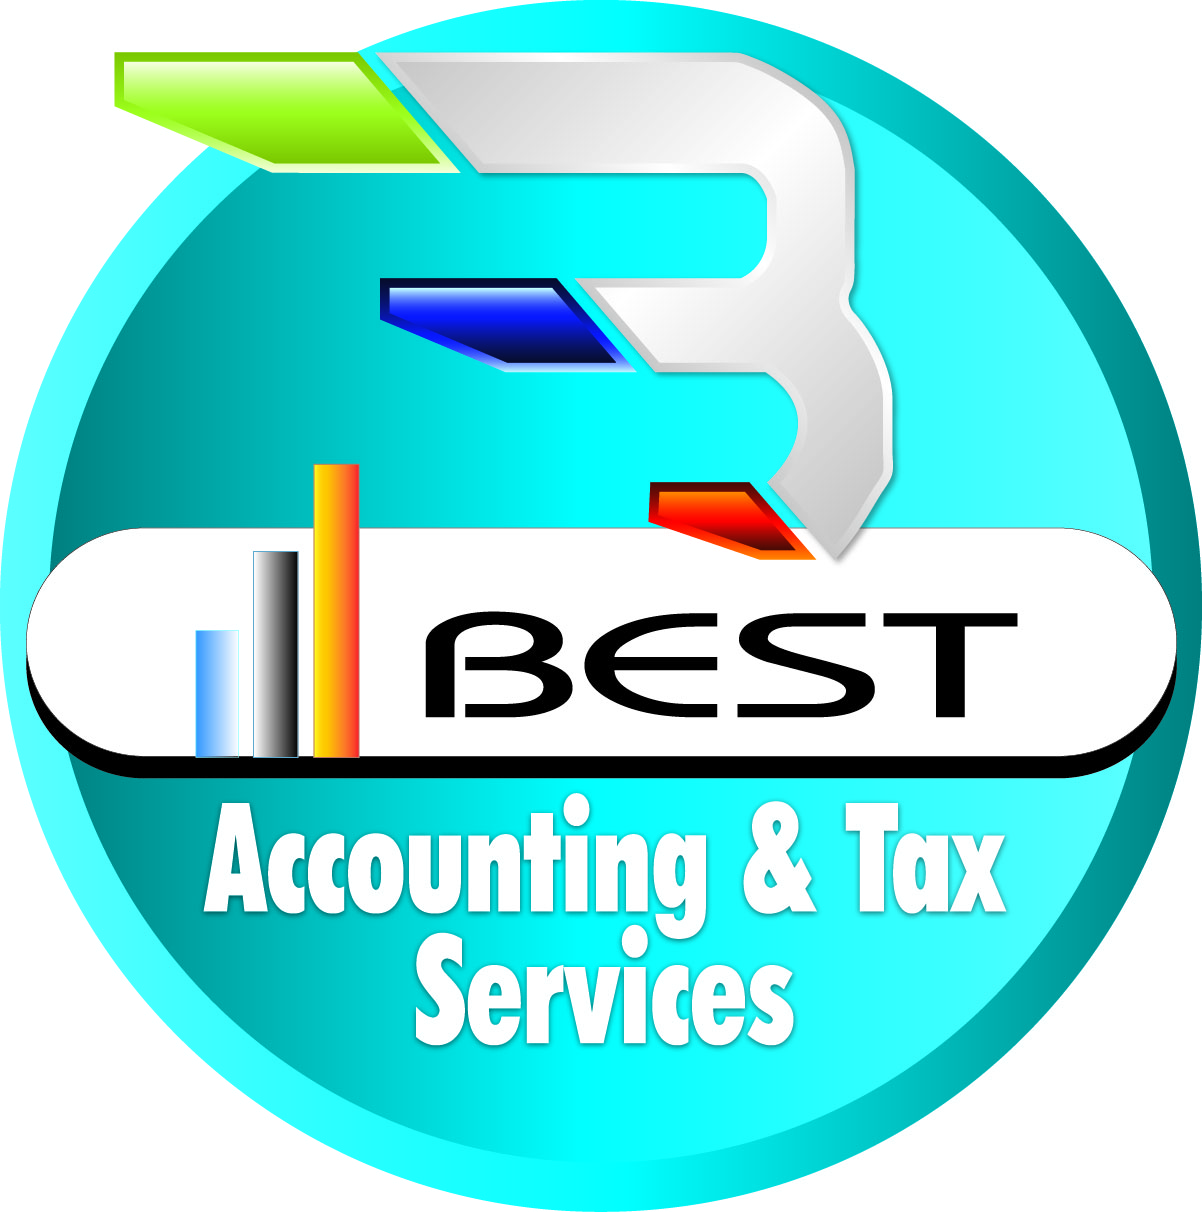 Best Accounting & Tax Services